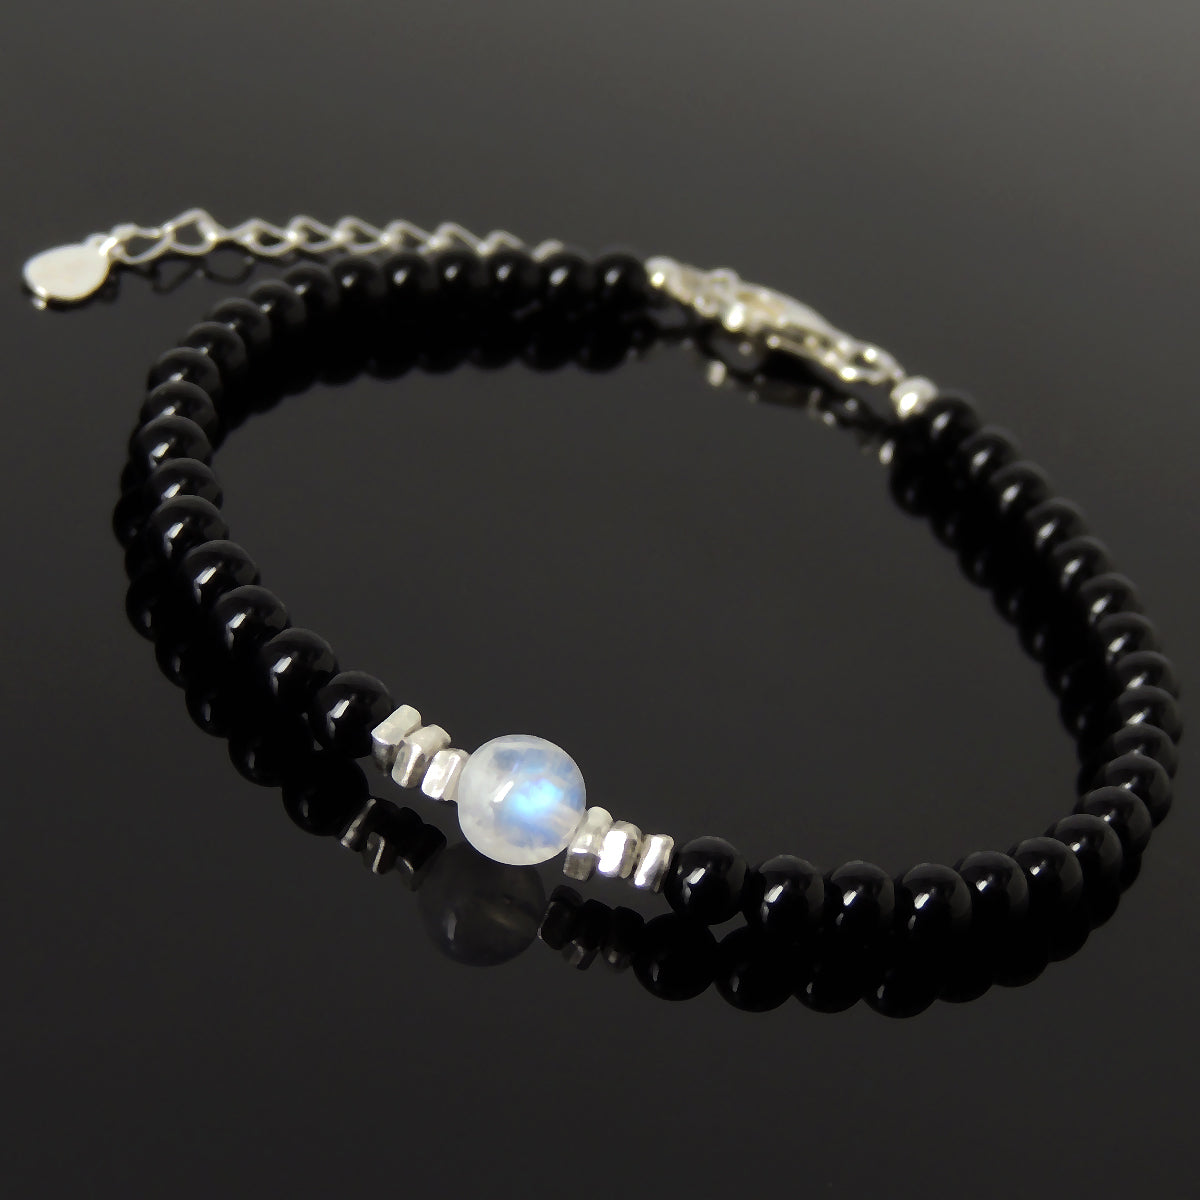 Grade AA Moonstone & Bright Black Onyx Healing Gemstone Bracelet with S925 Sterling Silver Chain & Clasp - Handmade by Gem & Silver BR1228